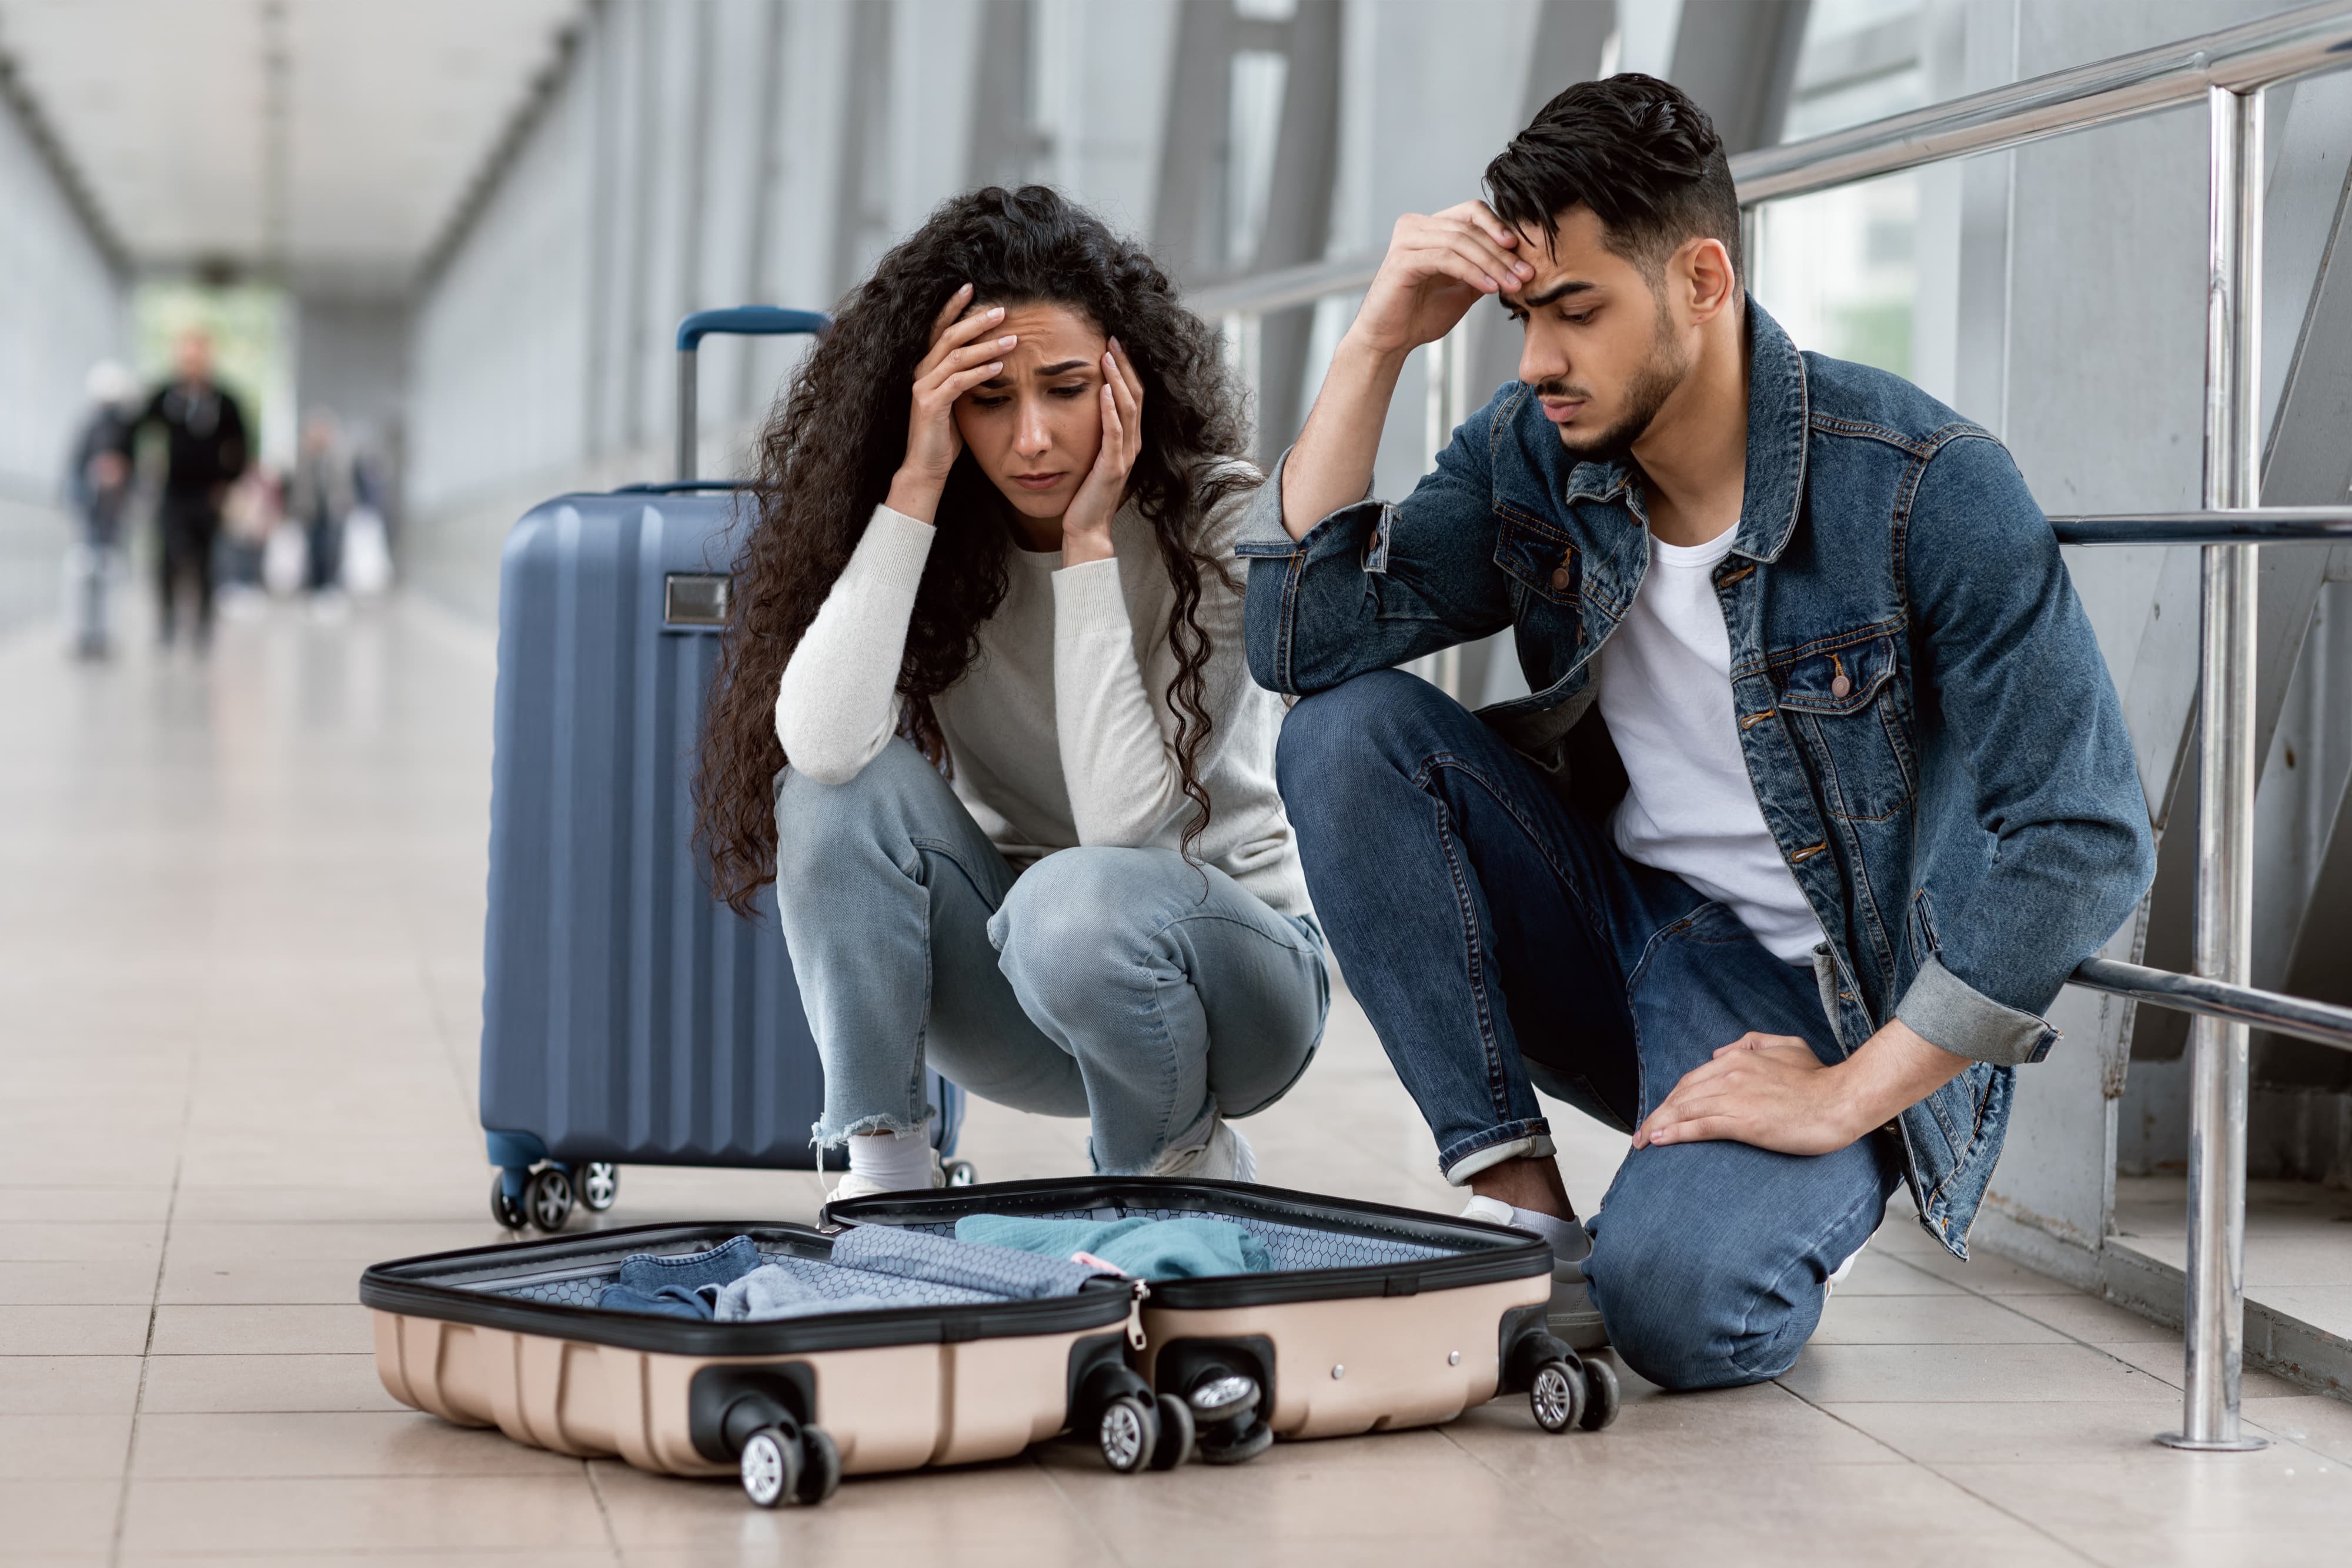 Frustrated middle eastern couple in airport looking at open suitcase for their missed items